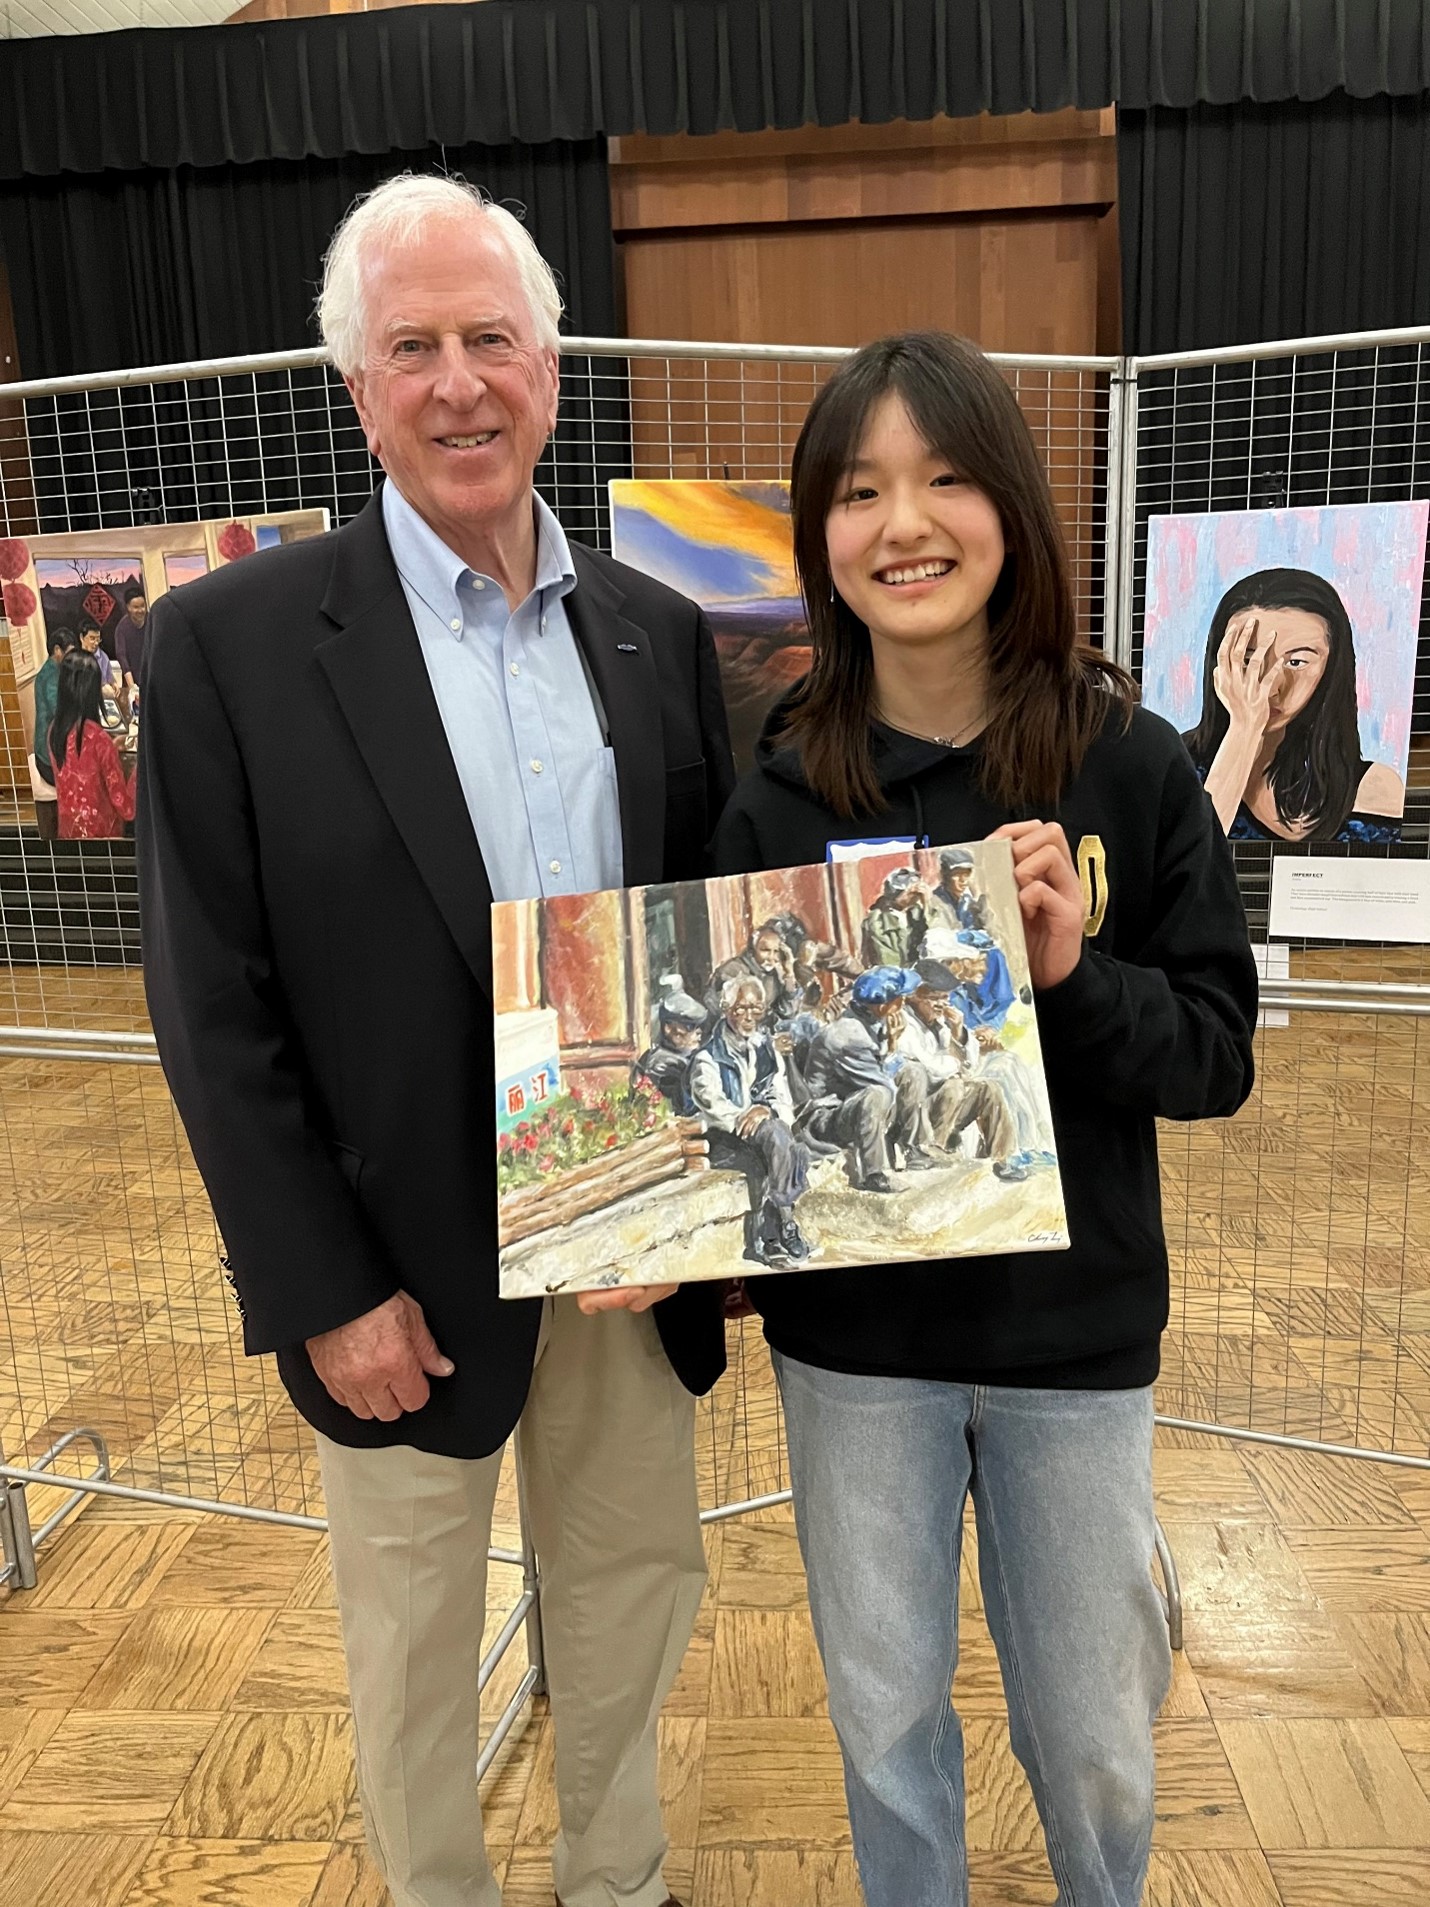 Rep. Thompson standing with Catherine Li who is holding her artwork.